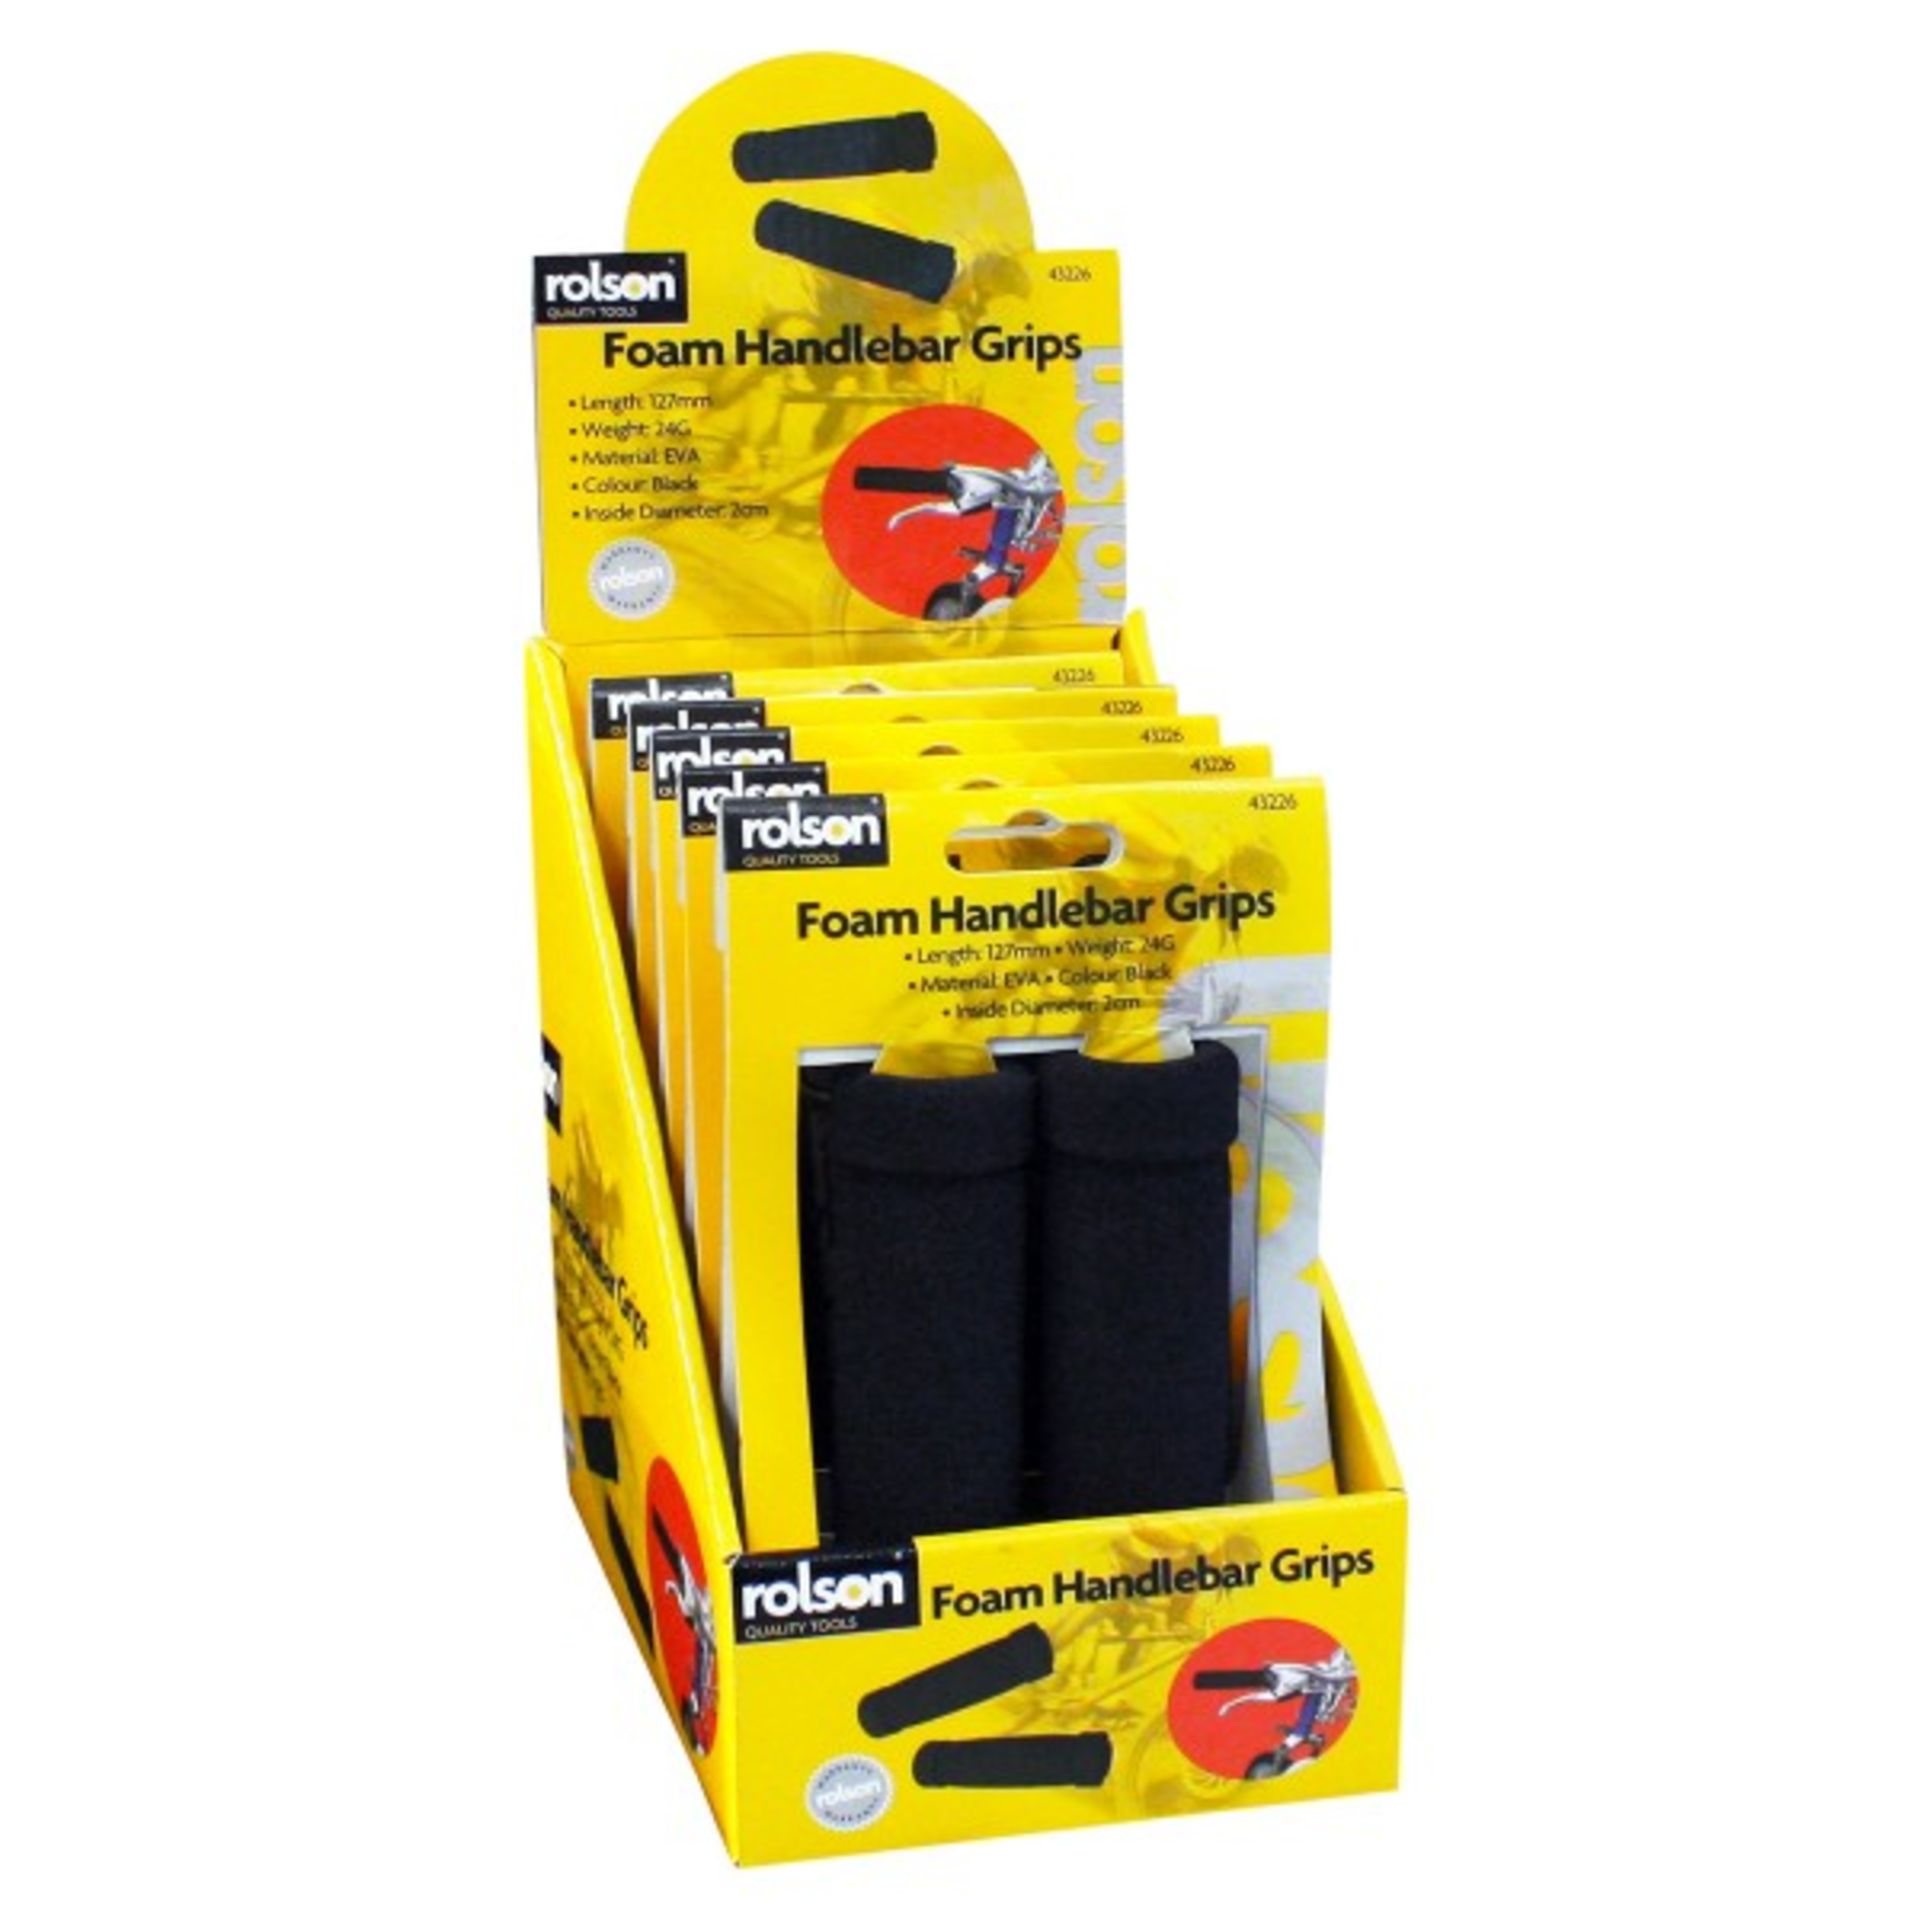 2x Retail Display boxes of 4 pairs of Rolson Bicycle Foam Handle Grips, brand new in packaging,